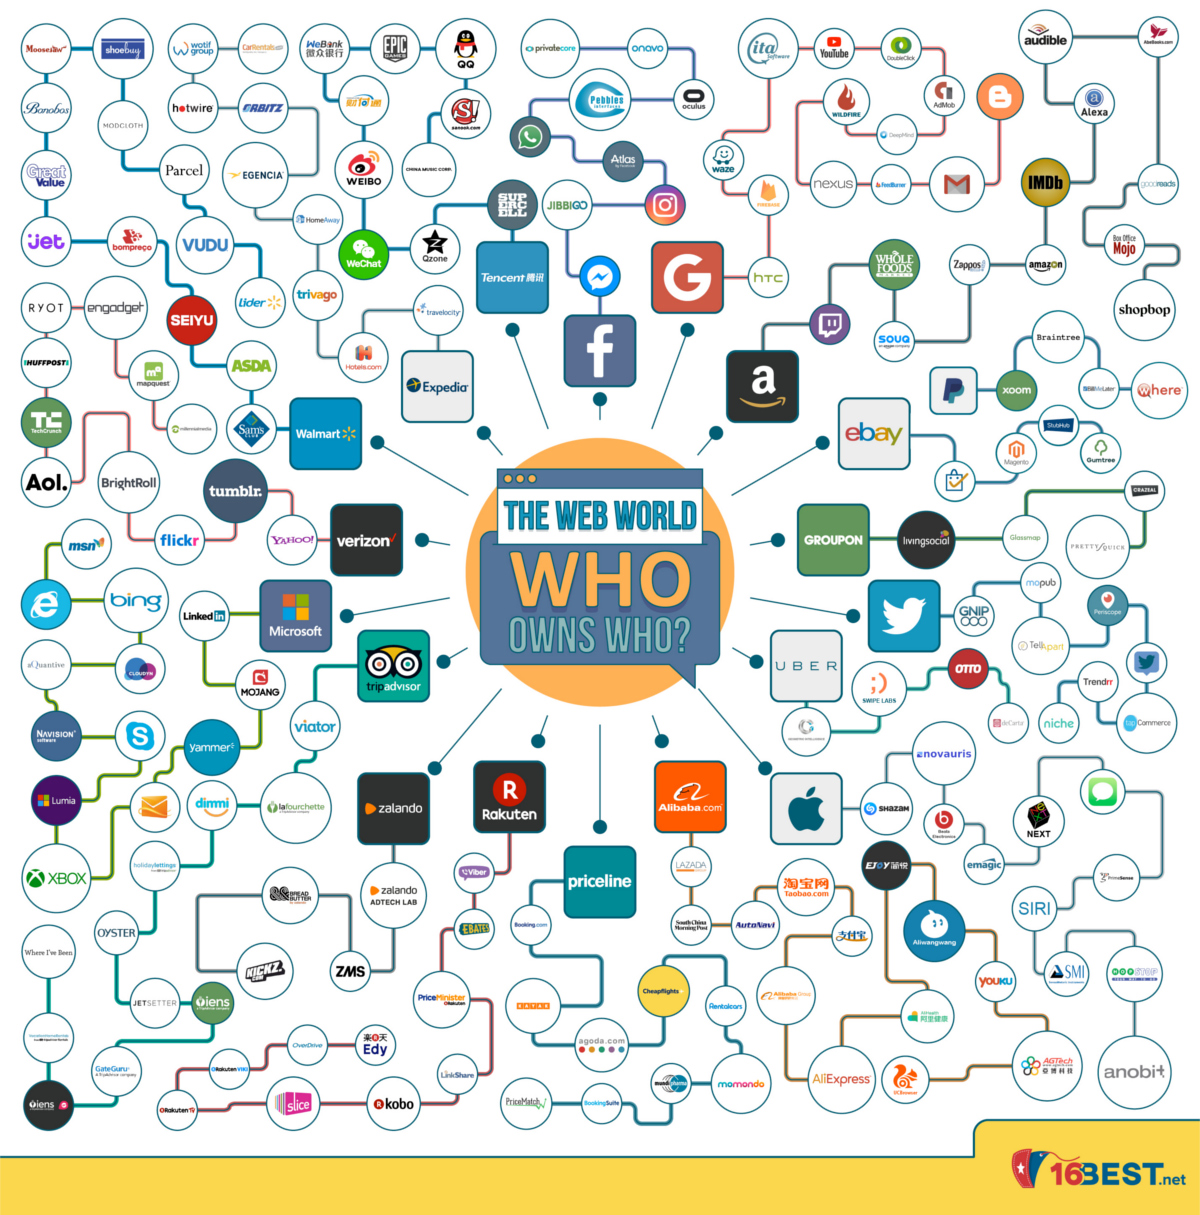 Internet Giants: Who Owns Who on the Web